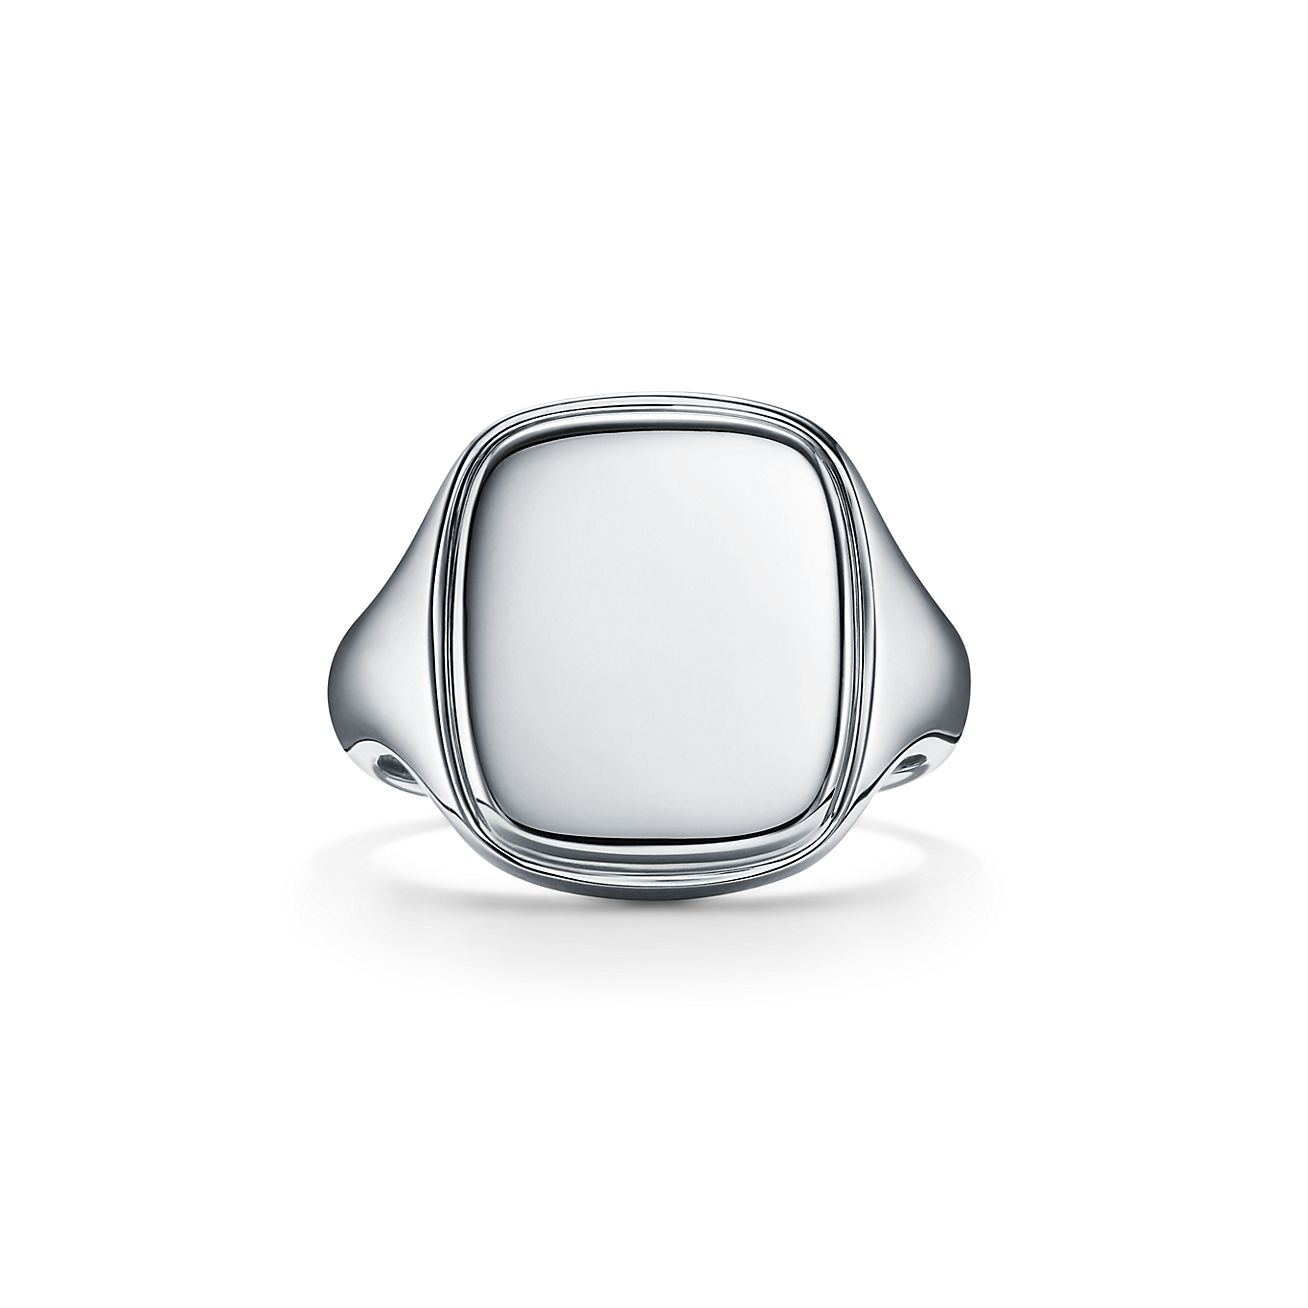 Square signet ring in sterling silver, 18 mm wide. | Tiffany & Co.